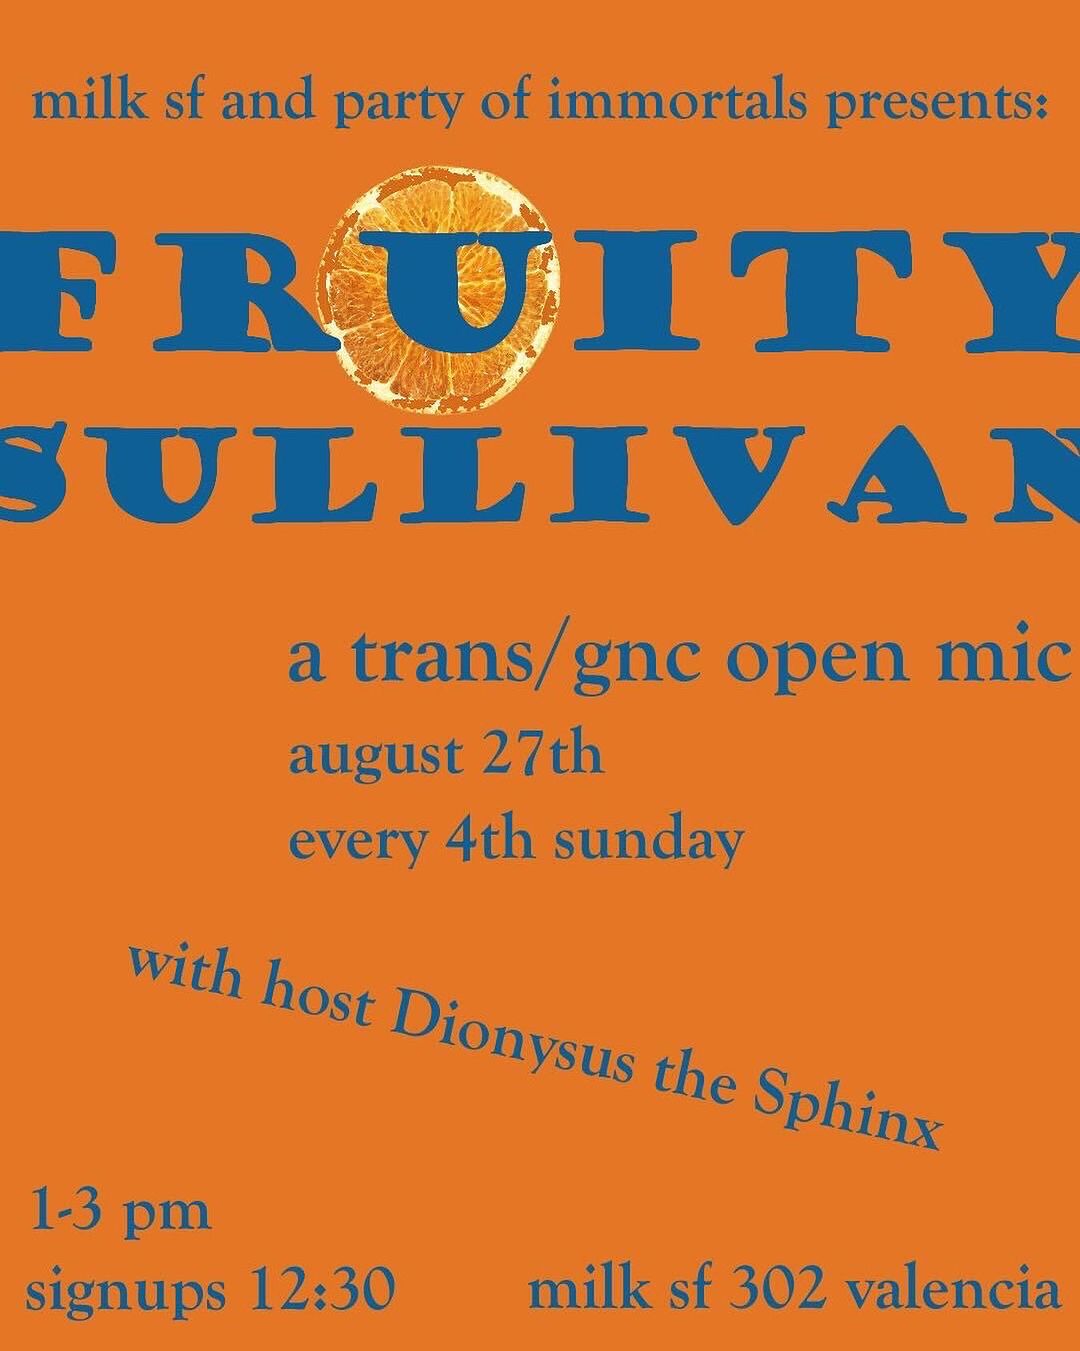 trans open mic, 4th sundays of the month from 1-3pm